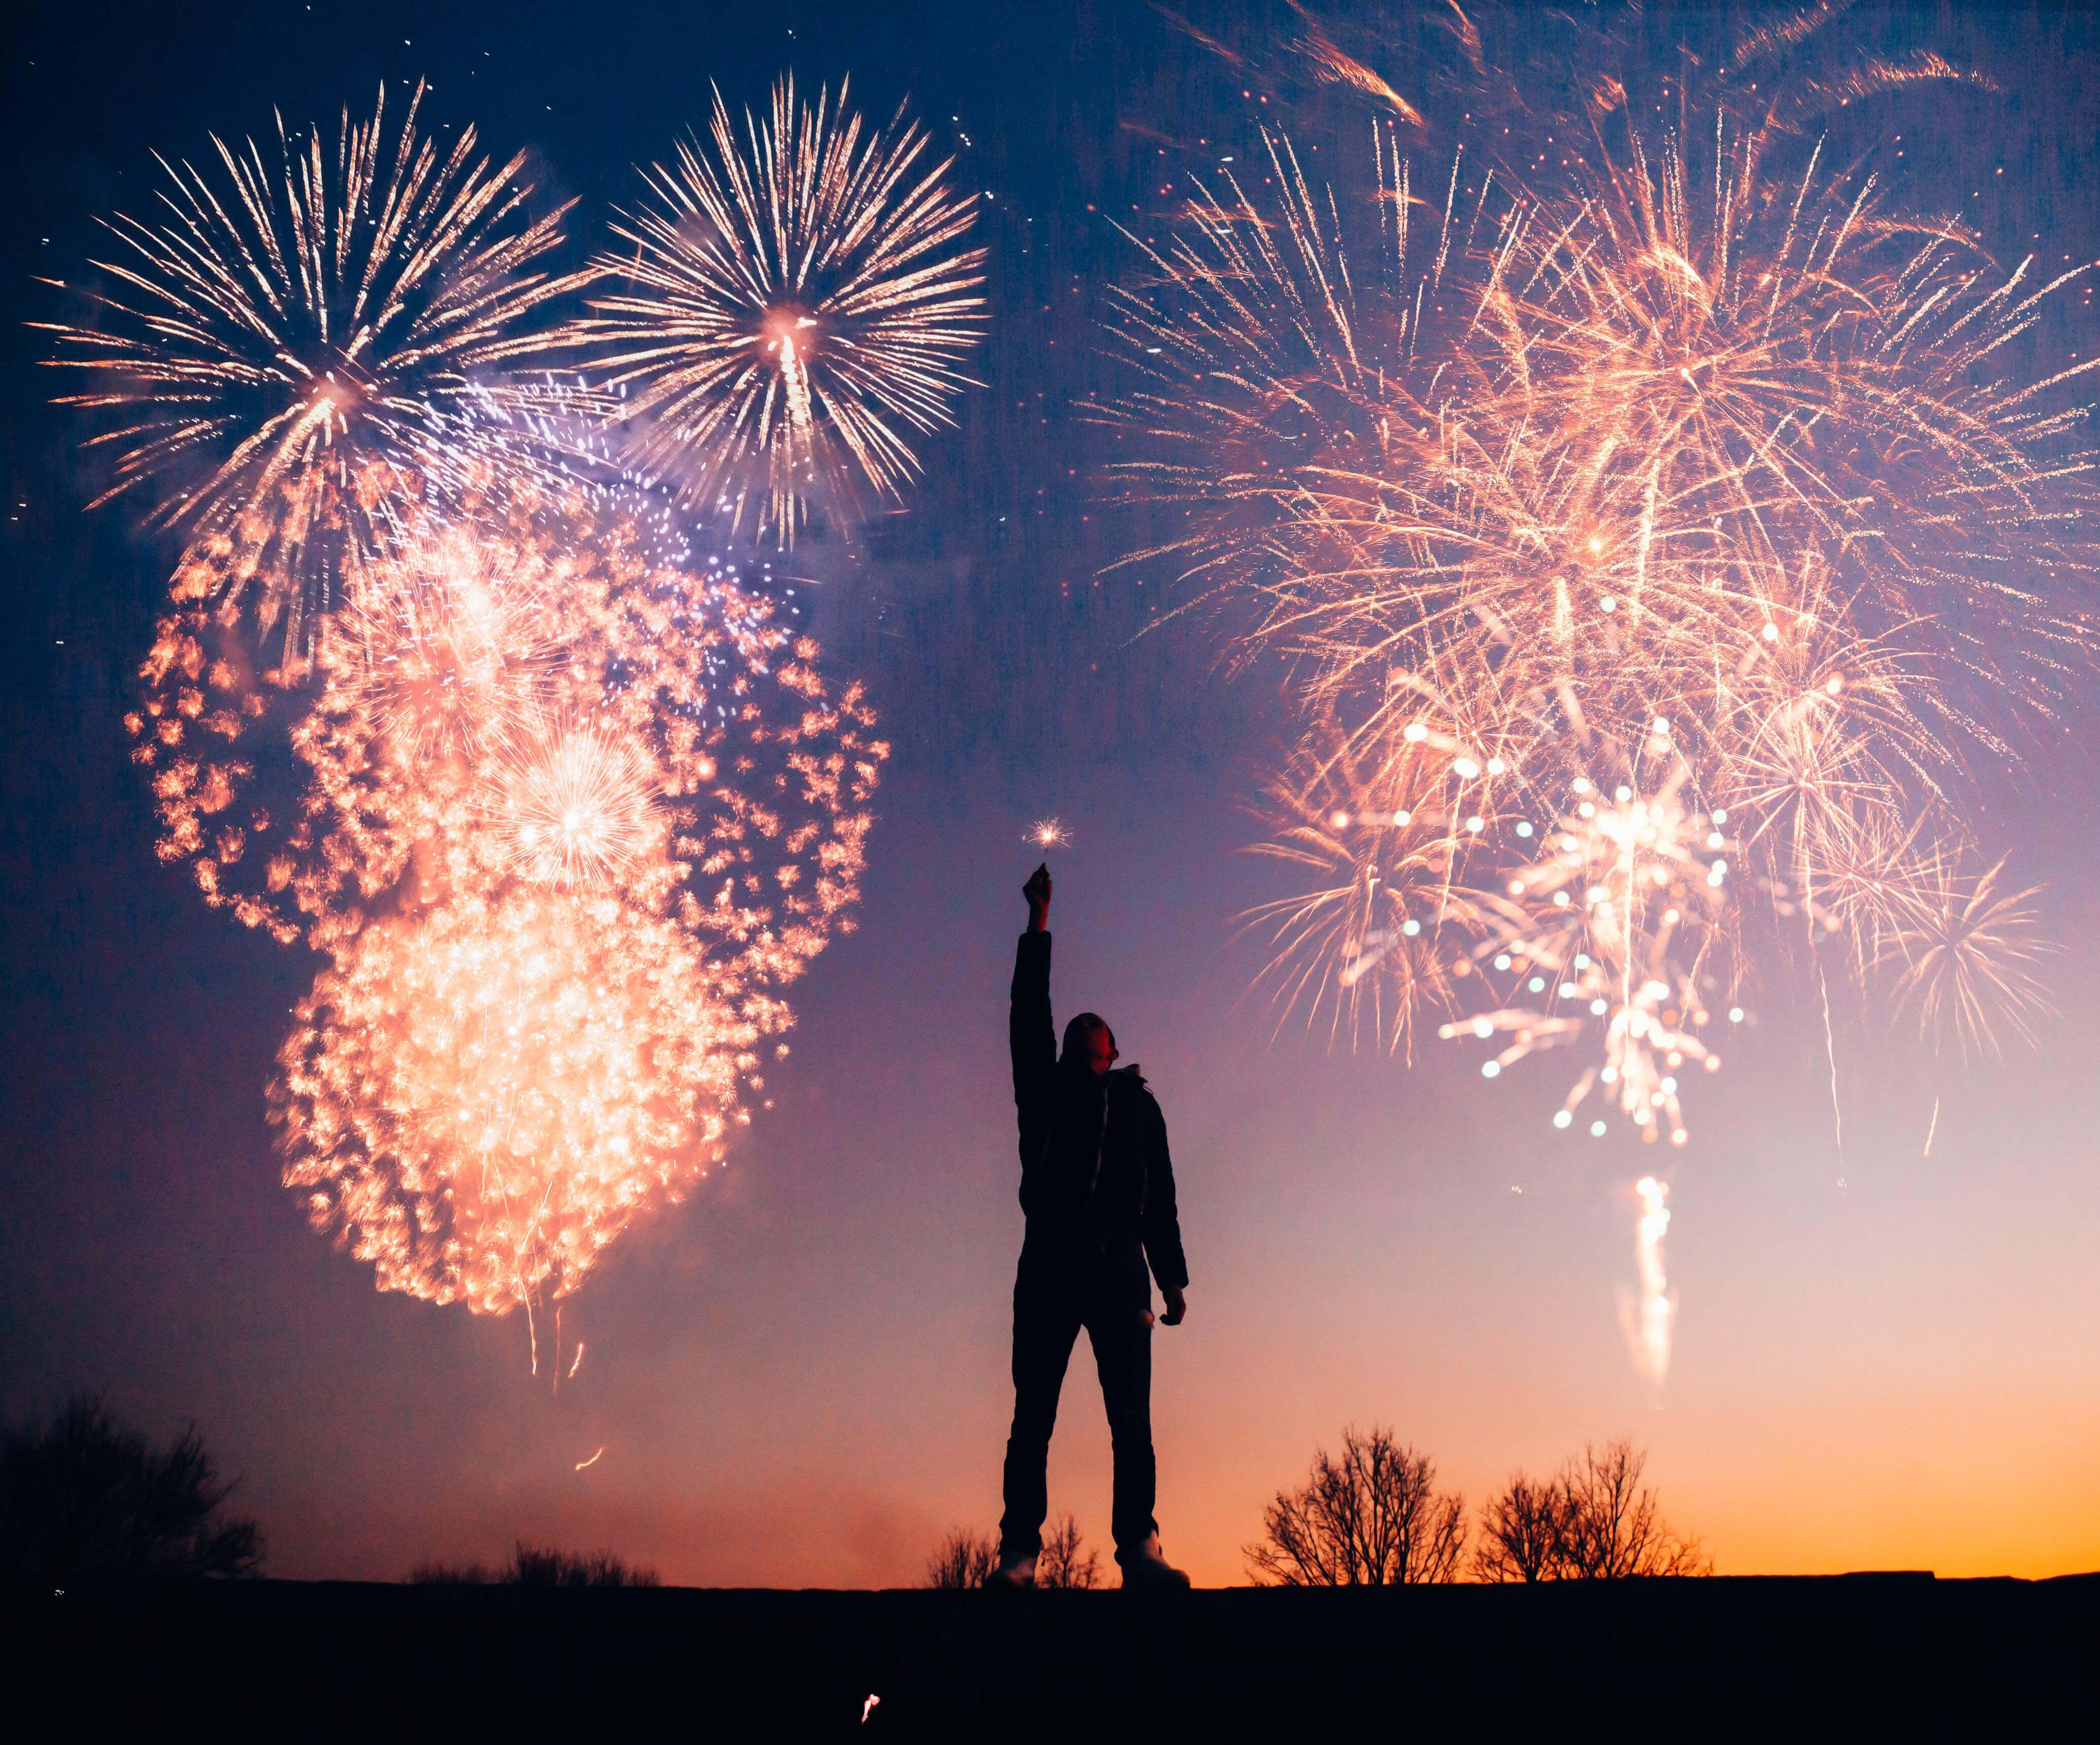 4 Reasons to Consult Professionals When Using Fireworks